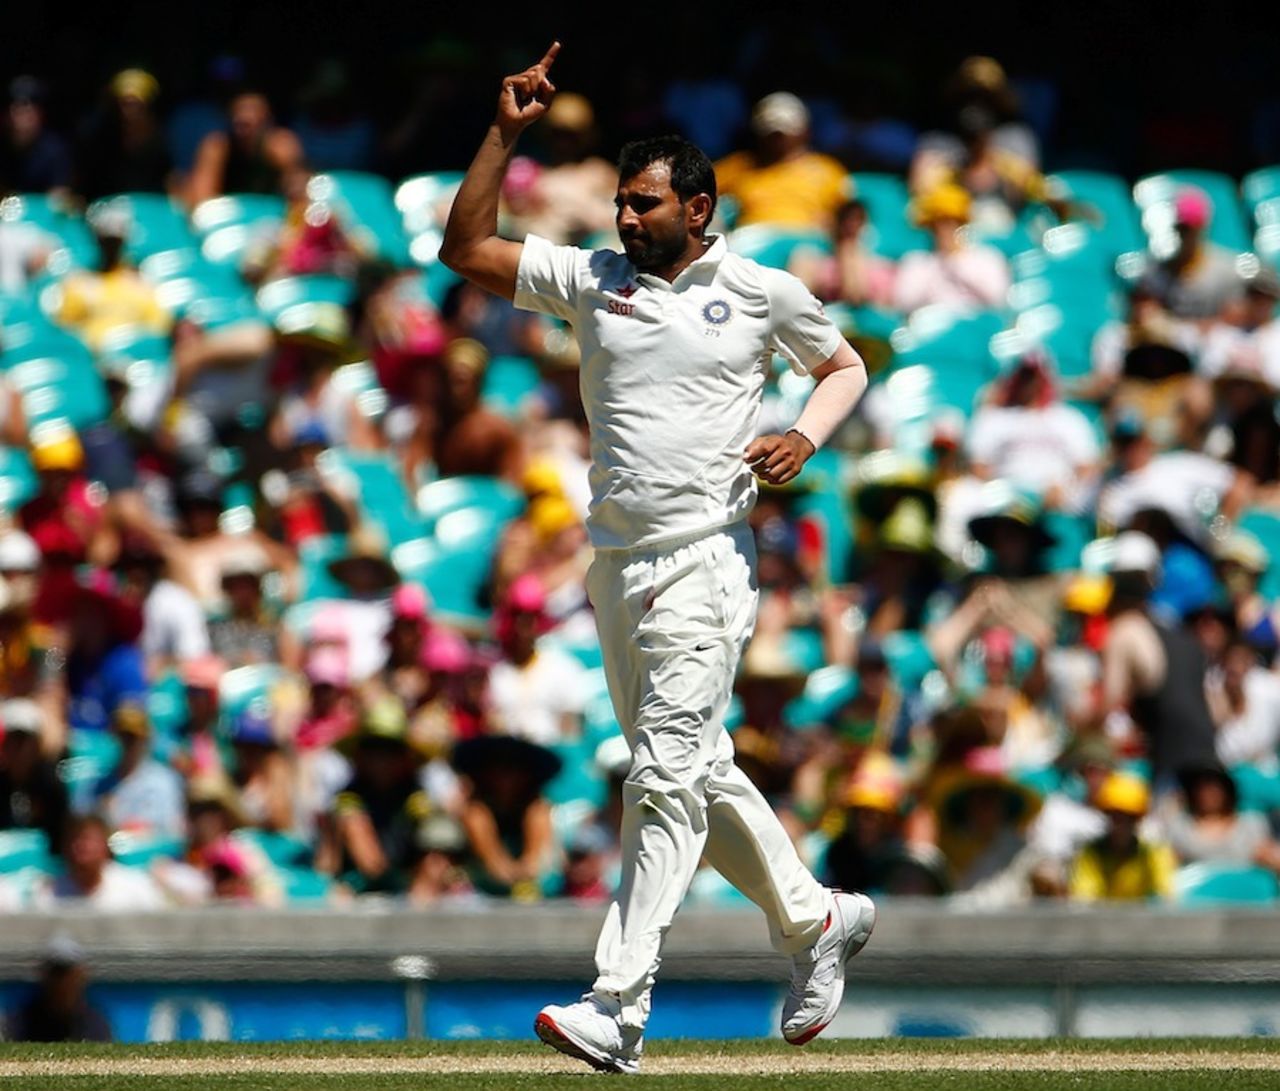 Mohammed Shami finished with 5 for 112, Australia v India, 4th Test, Sydney, 2nd day, January 7, 2015